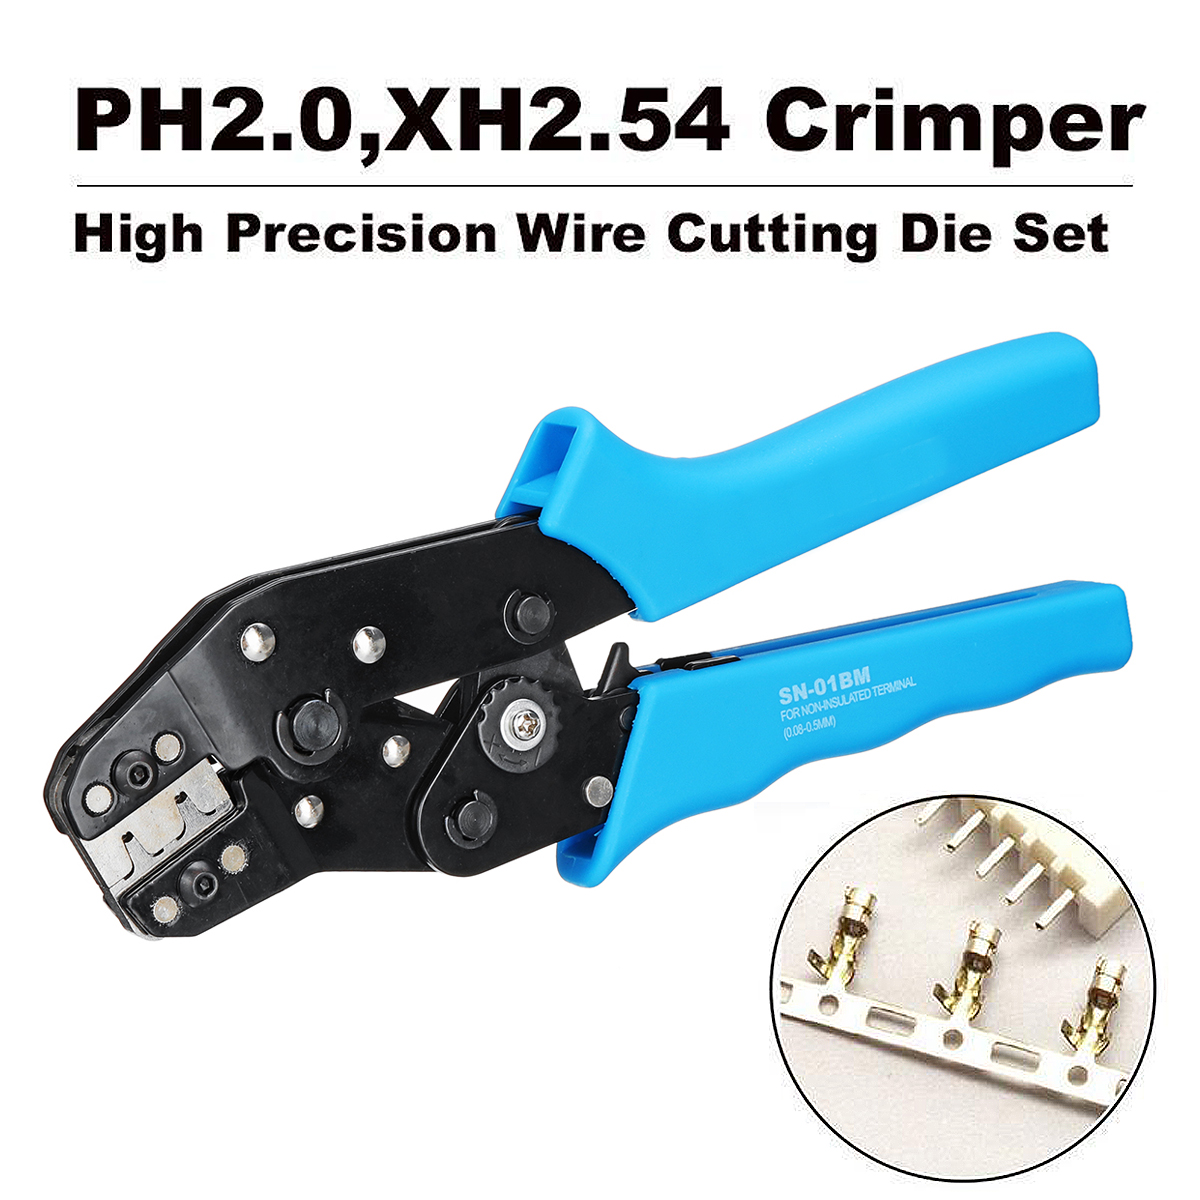 SN-01BM AWG28-20 Self-adjusting Terminal Wire Cable Crimping Pliers Tool for Dupont PH2.0 XH2.54 KF2510 JST Molex D-SUB Terminal 15